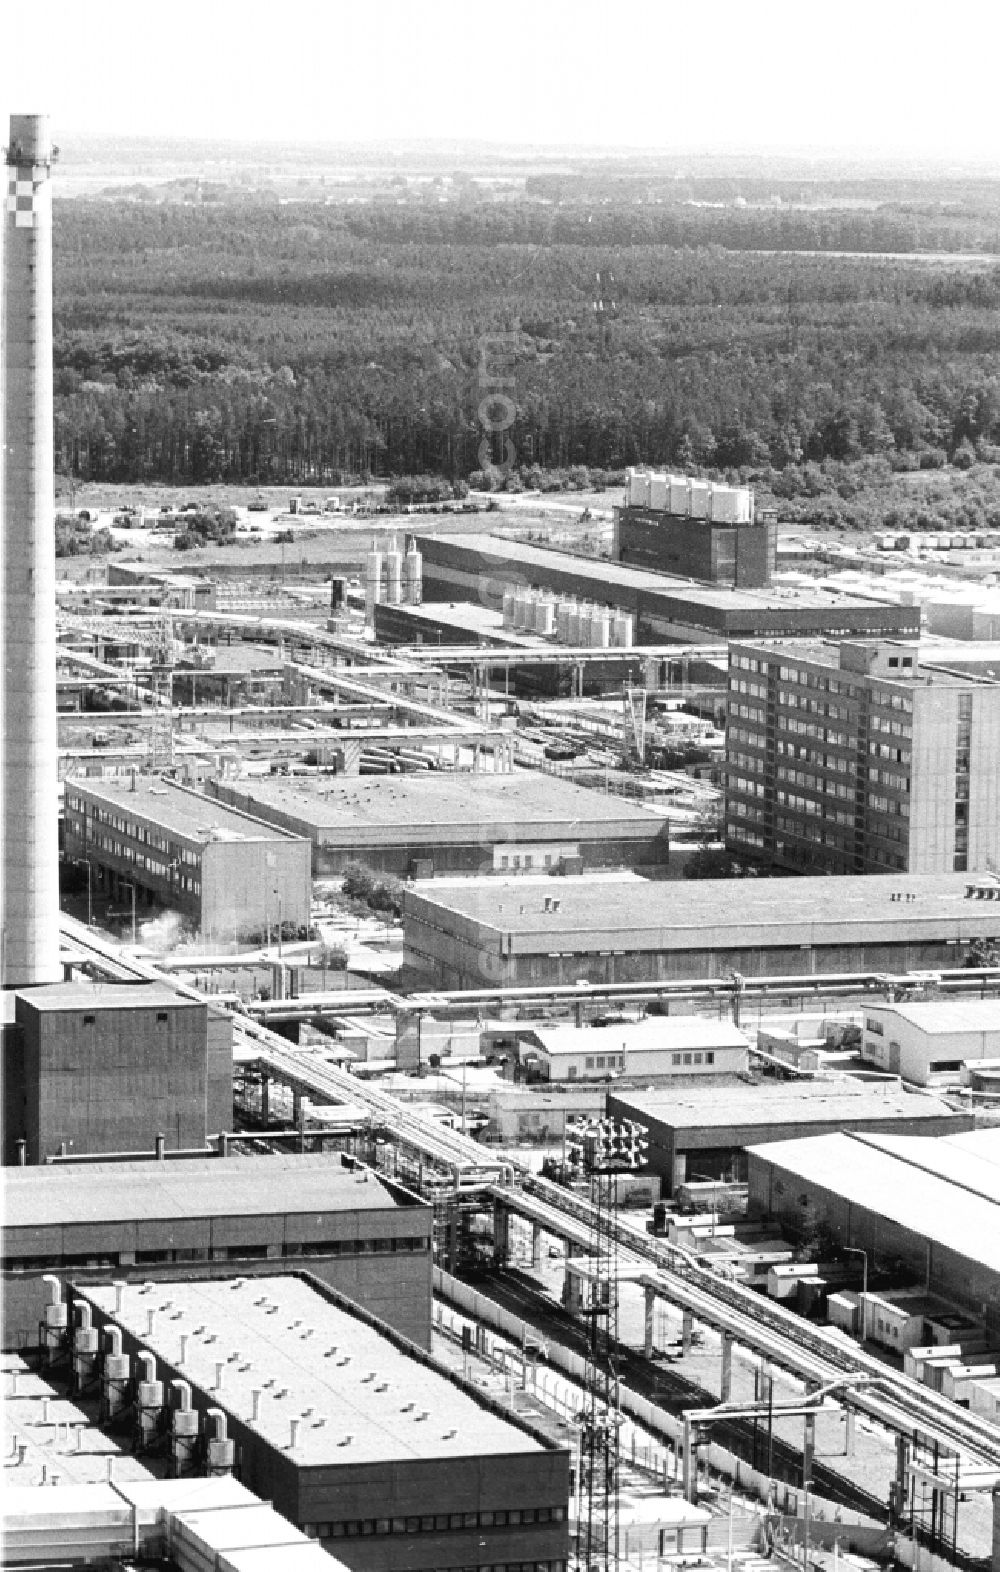 GDR picture archive: Lubmin - Decommissioned nuclear power plant in Lubmin in the state Mecklenburg-Western Pomerania on the territory of the former GDR, German Democratic Republic